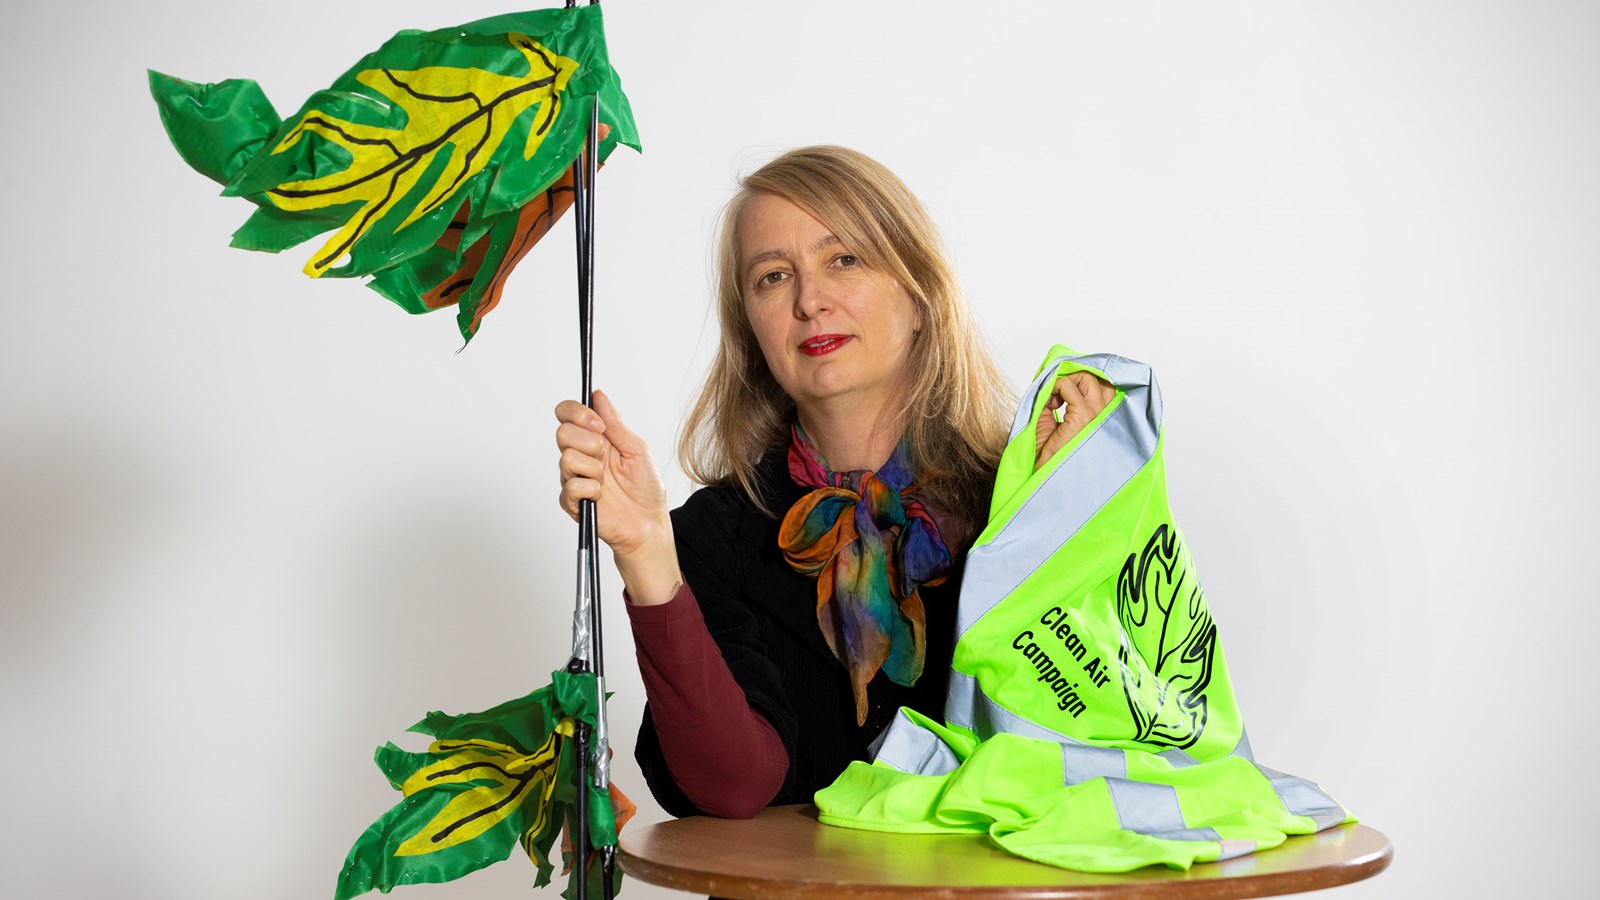 Artist Zoe Walker poses with a high vis waistcoat and leaf prop